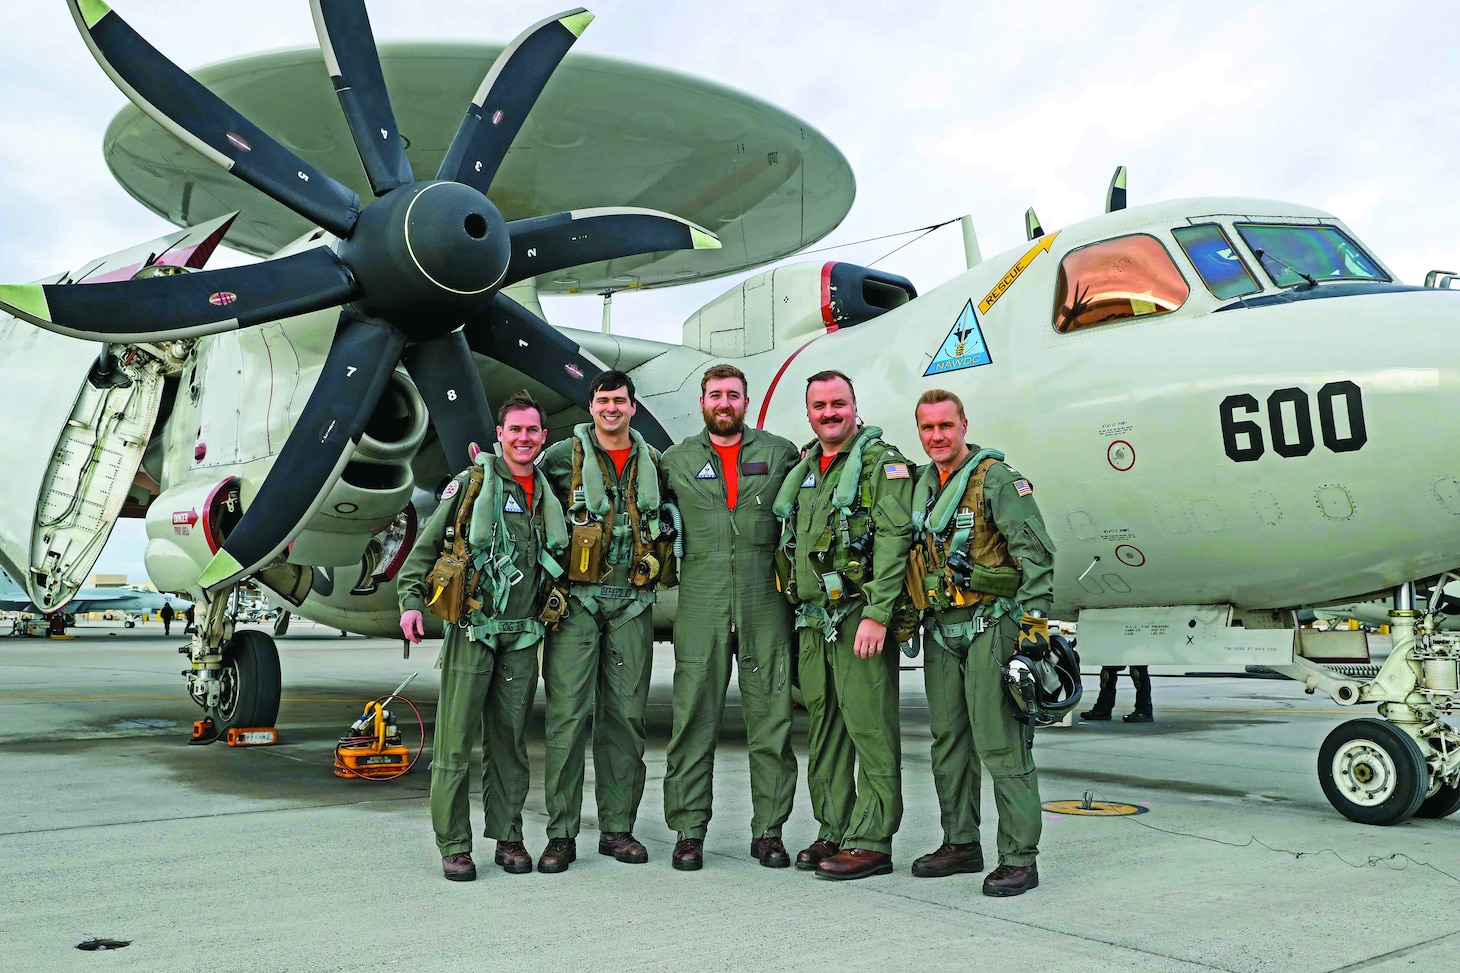 From left to right, assigned to Naval Aviation Warfare Development Command (NAWDC), Carrier Airborne Electronic Warfare Weapons School (CAEWWS), U.S. Navy Lt. Nicholas Tucker, U.S. Navy Lt. Zachary Verissimo, British Royal Navy Lt. Cmdr. Tom Rixon, U.S. Navy Cmdr. Joshua Goodin, and Naval Air Station (NAS) Fallon Commanding Officer Capt. Shane Tanner pose for a photo on the flightline at NAS Fallon, Jan. 26, 2024. Home to the Fighting Saints of Fighter Squadron Composite 13 (VFC-13) and the Naval Aviation Warfare Development Command (NAWDC), NAS Fallon serves as the Navy’s premier tactical air warfare training center.